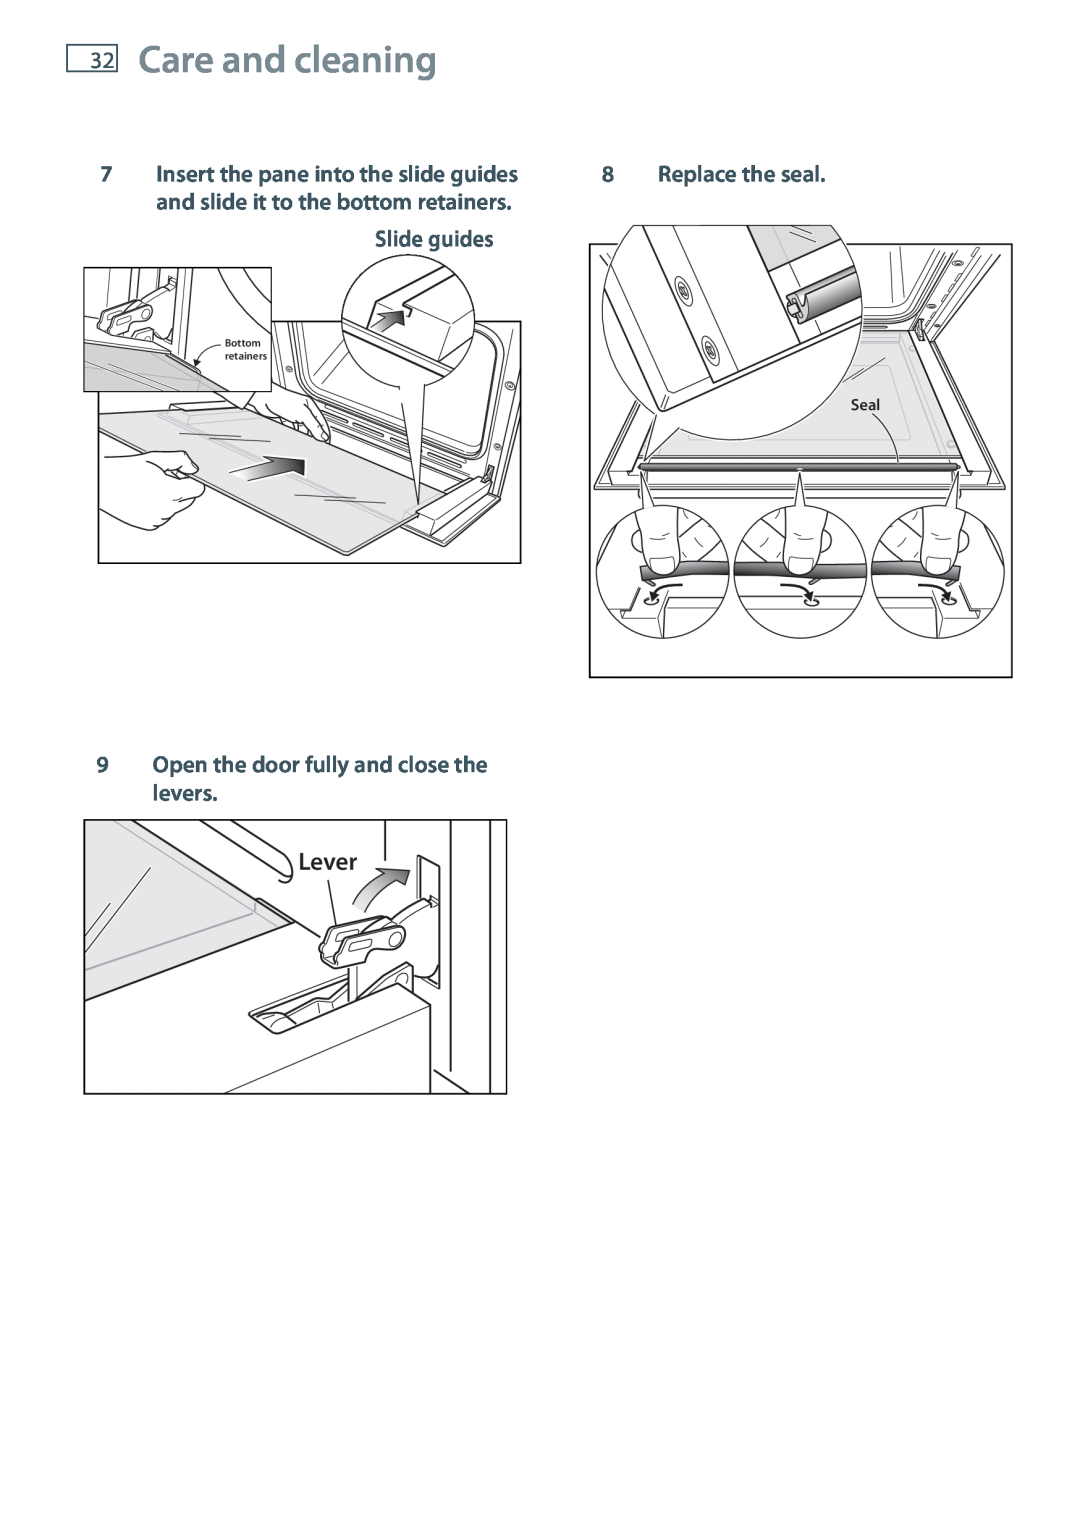 Fisher & Paykel OB60S9DE installation instructions 32Care and cleaning, Lever, Seal, Bottom, retainers 